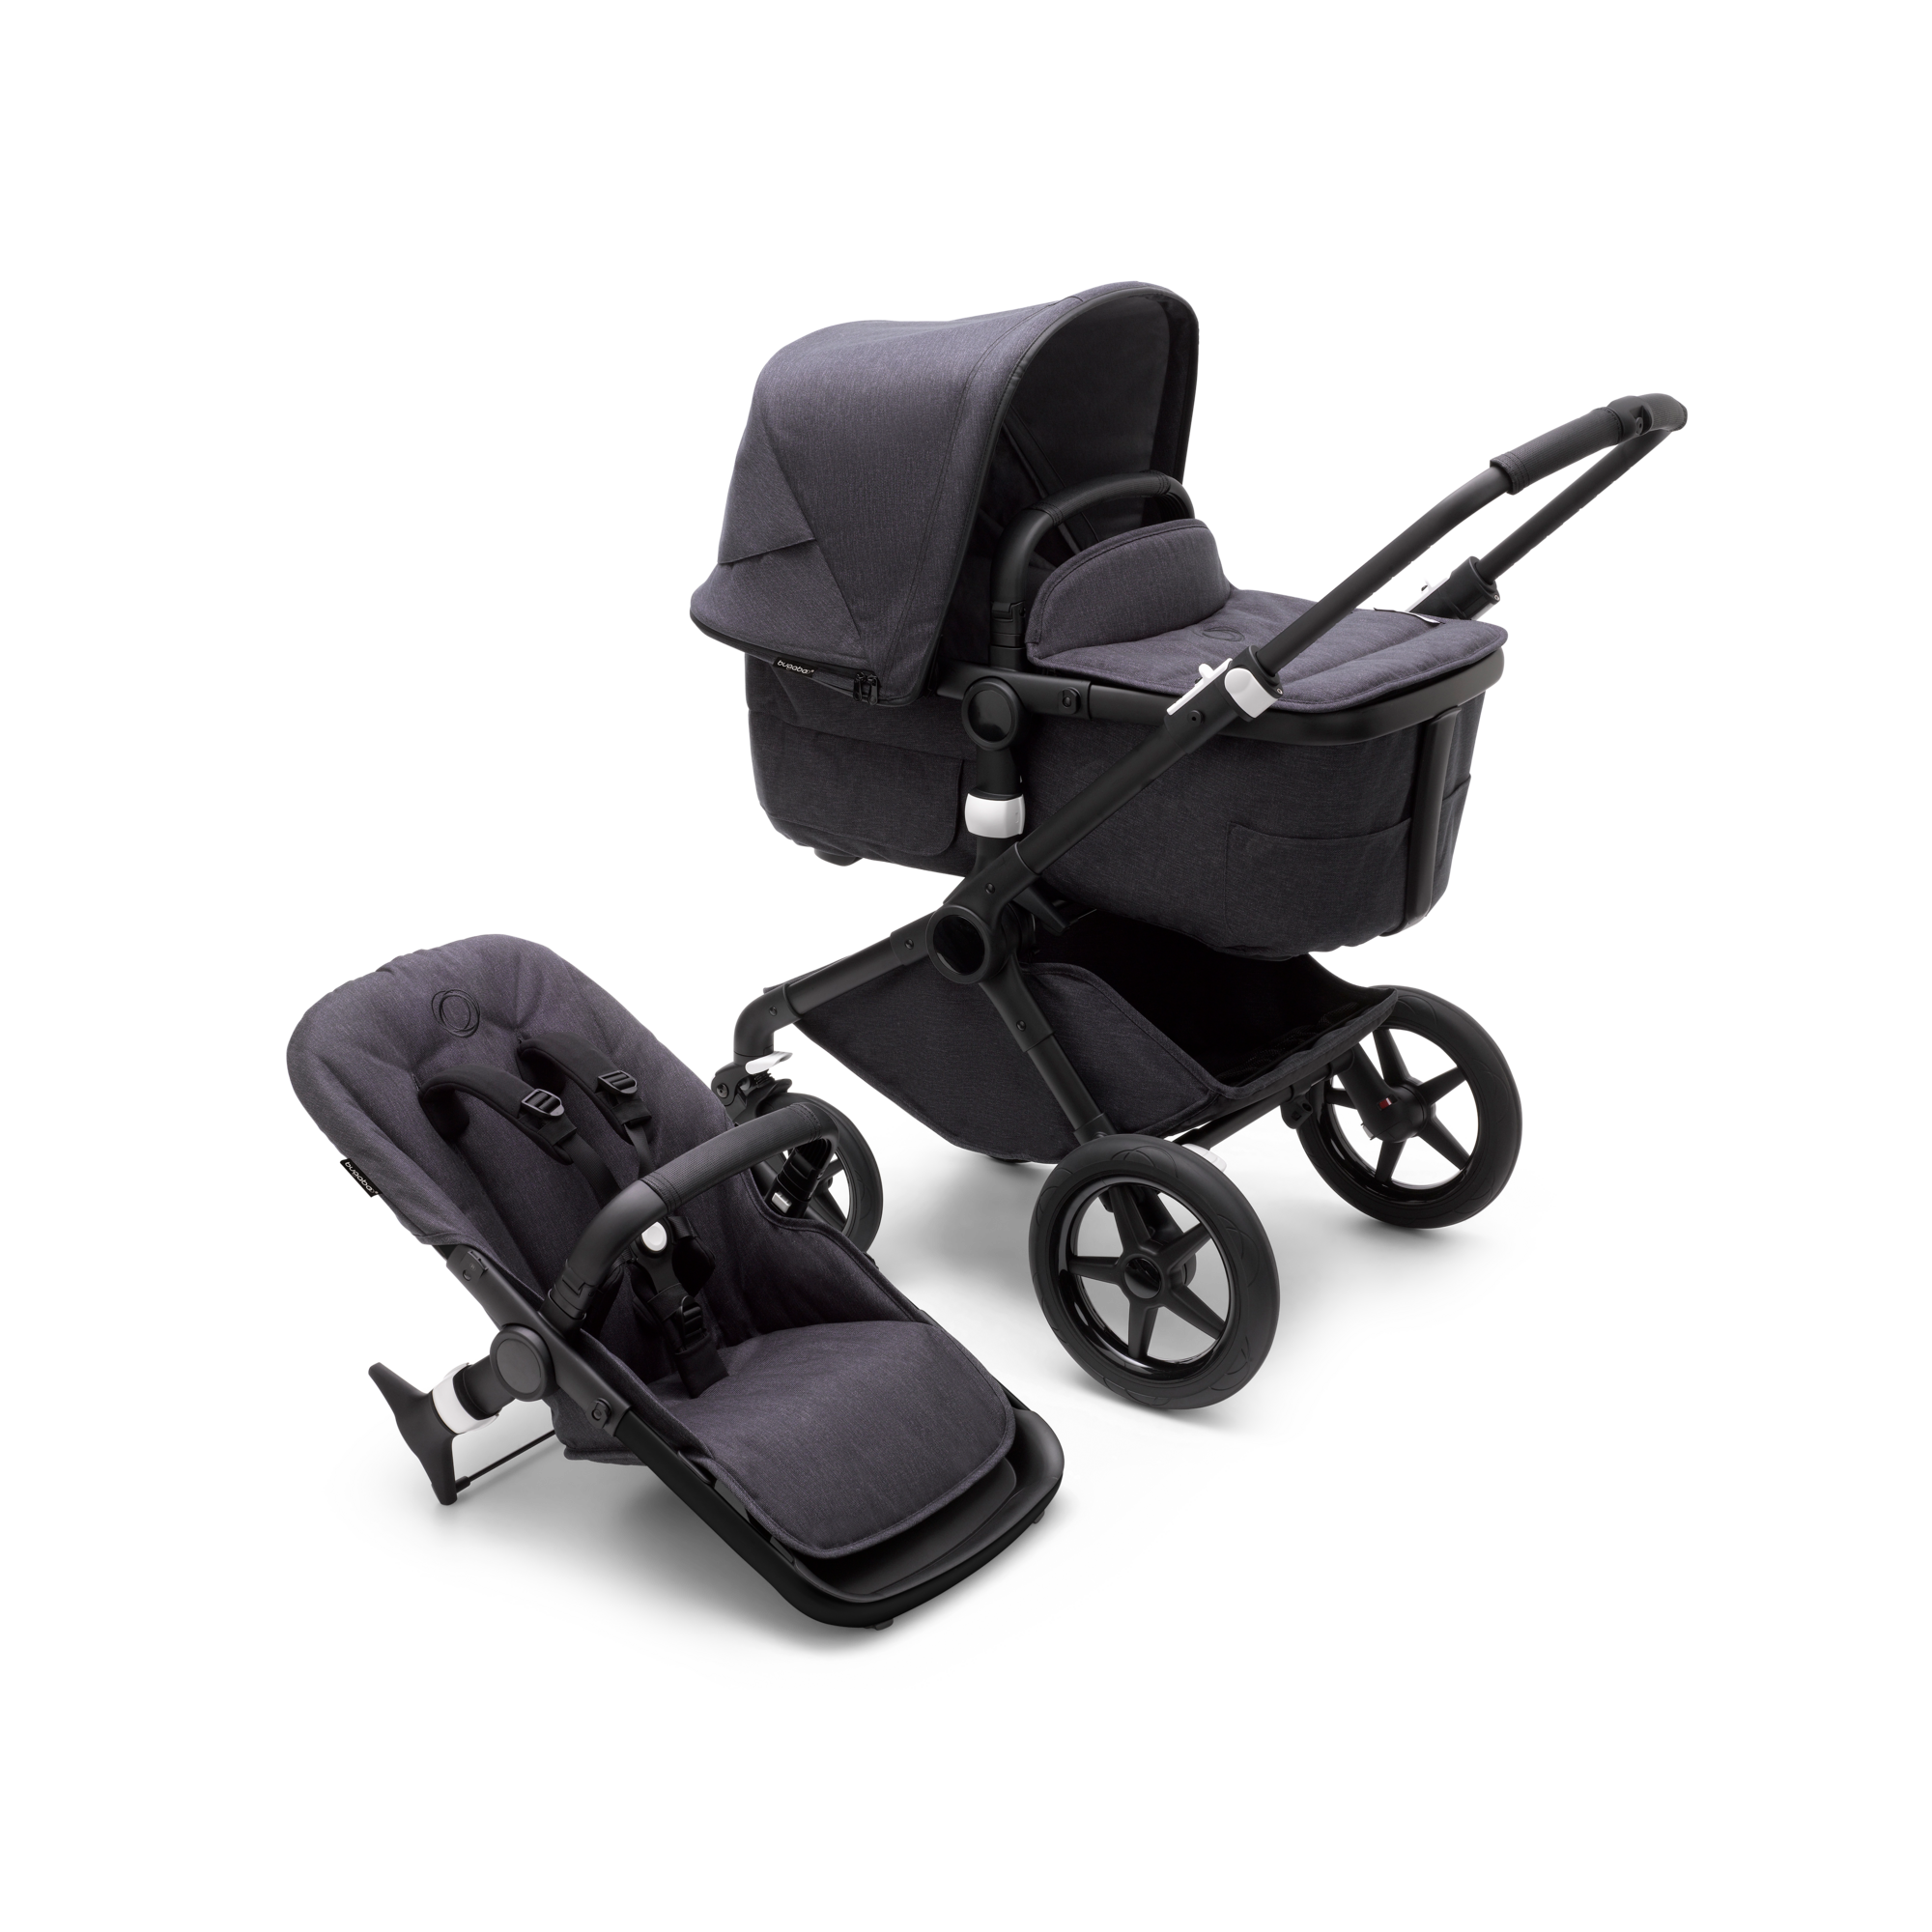 Ongemak heilig Paard Bugaboo Fox 3 bassinet and seat stroller Mineral collection washed black  sun canopy, mineral collection washed black fabrics, black chassis | Bugaboo